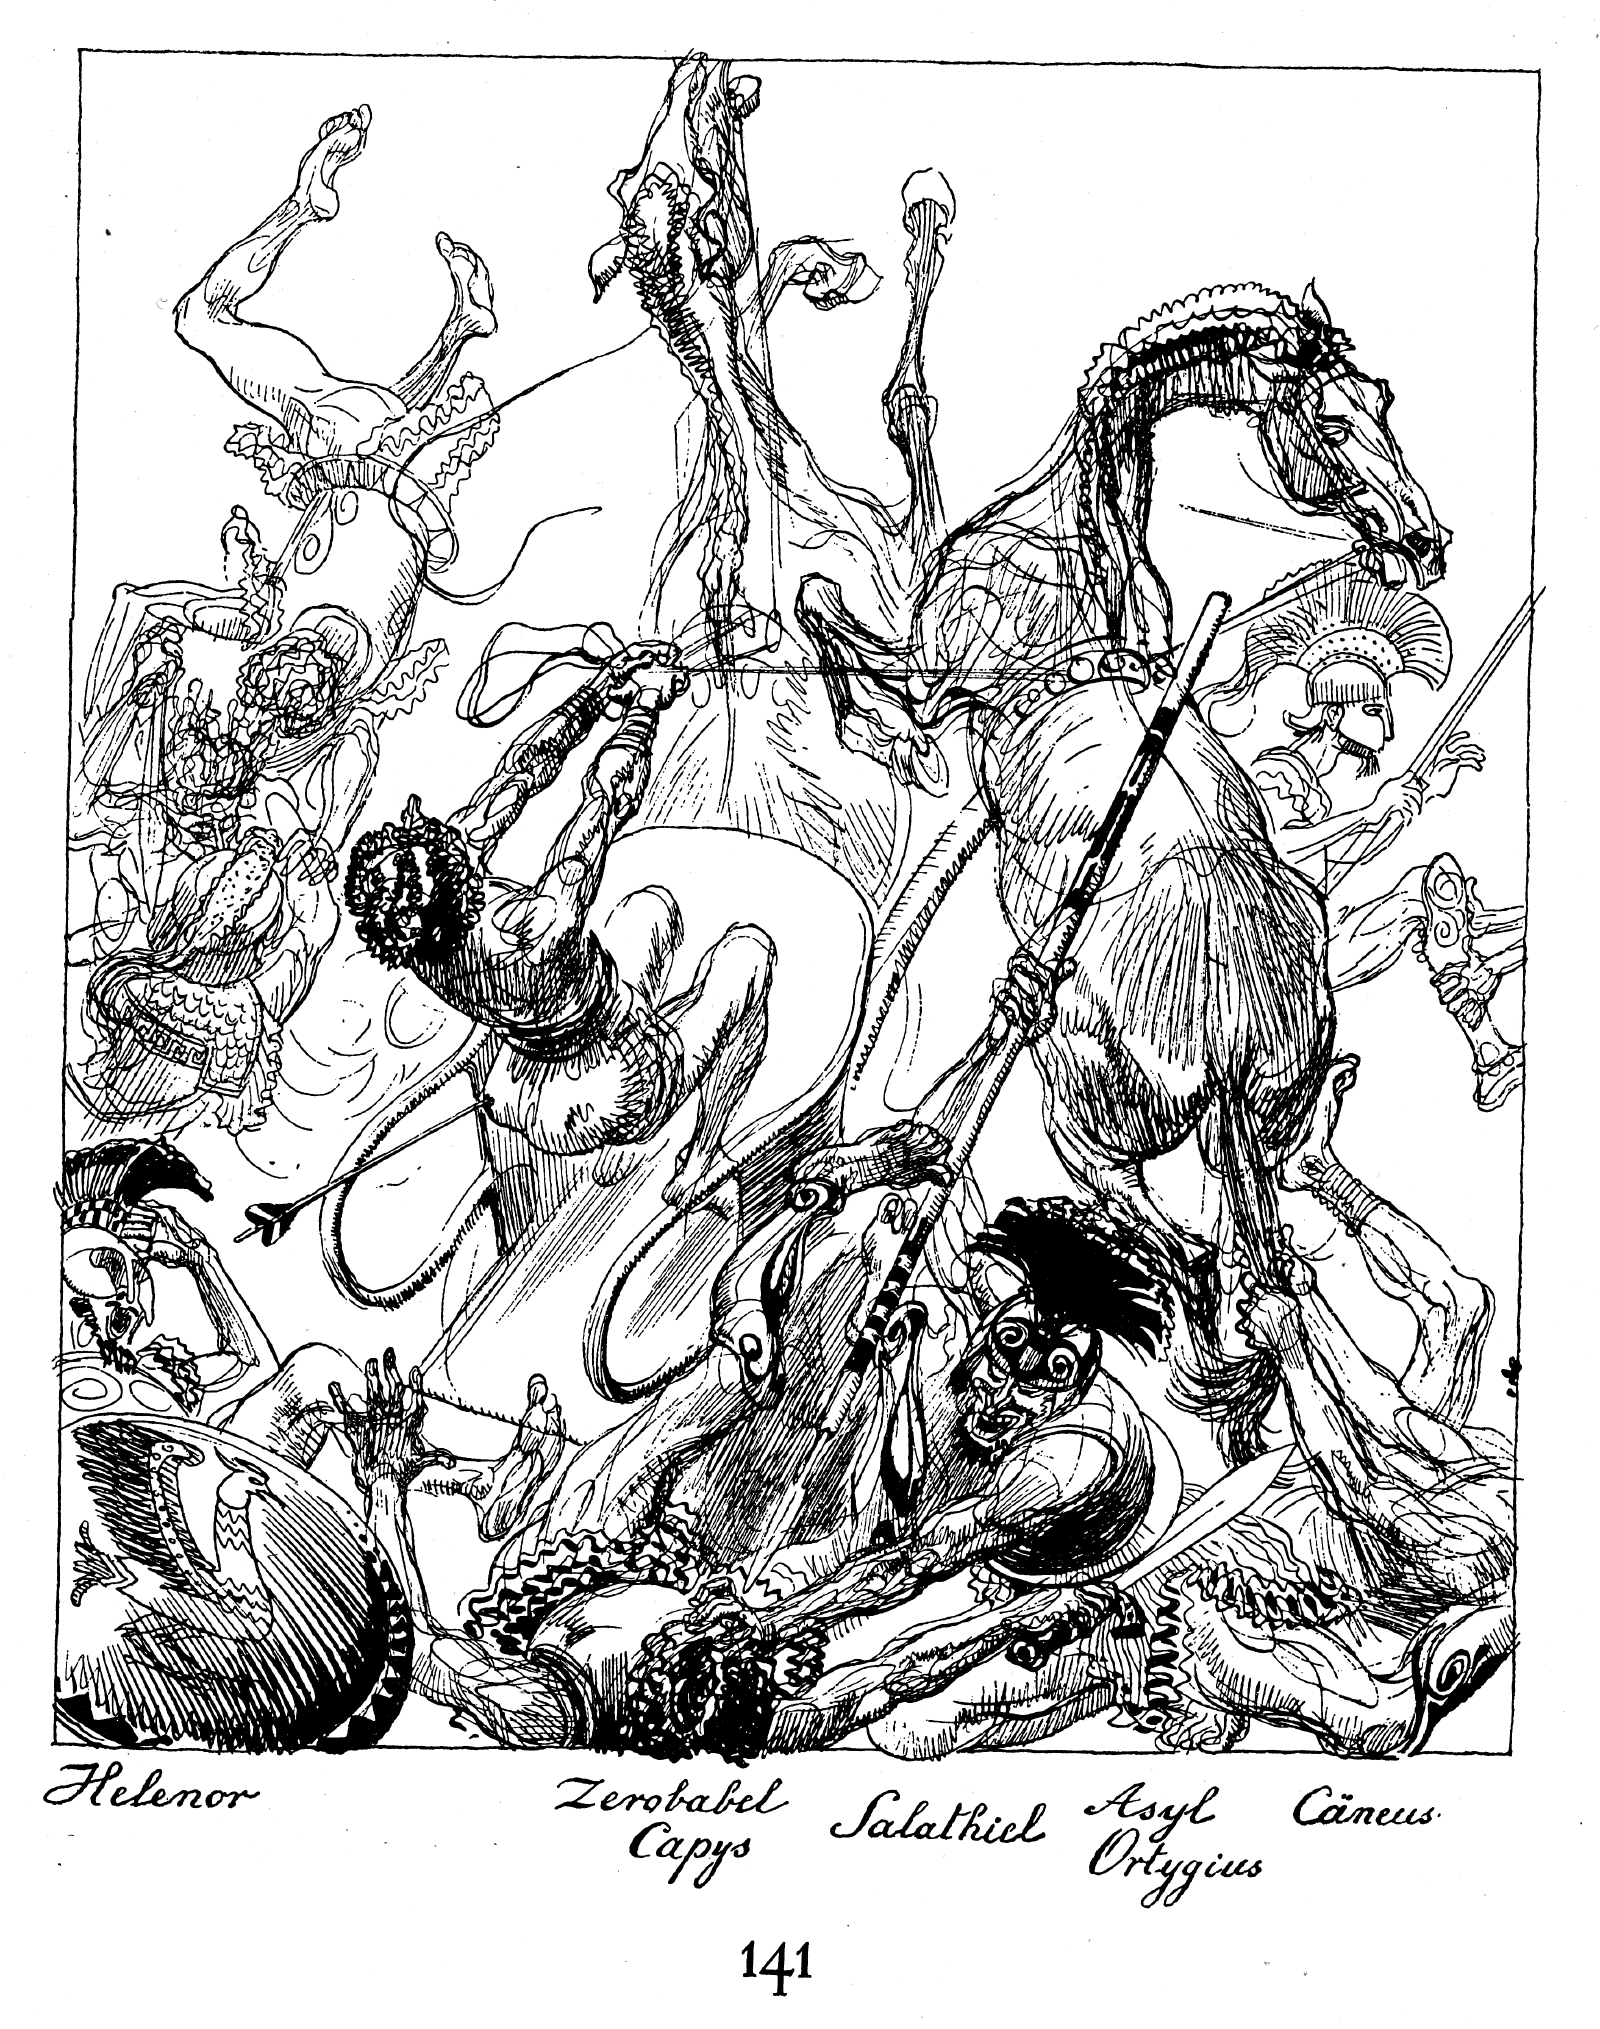 scans from the book Vergil Aeneis with Heinrich Kley illustrations